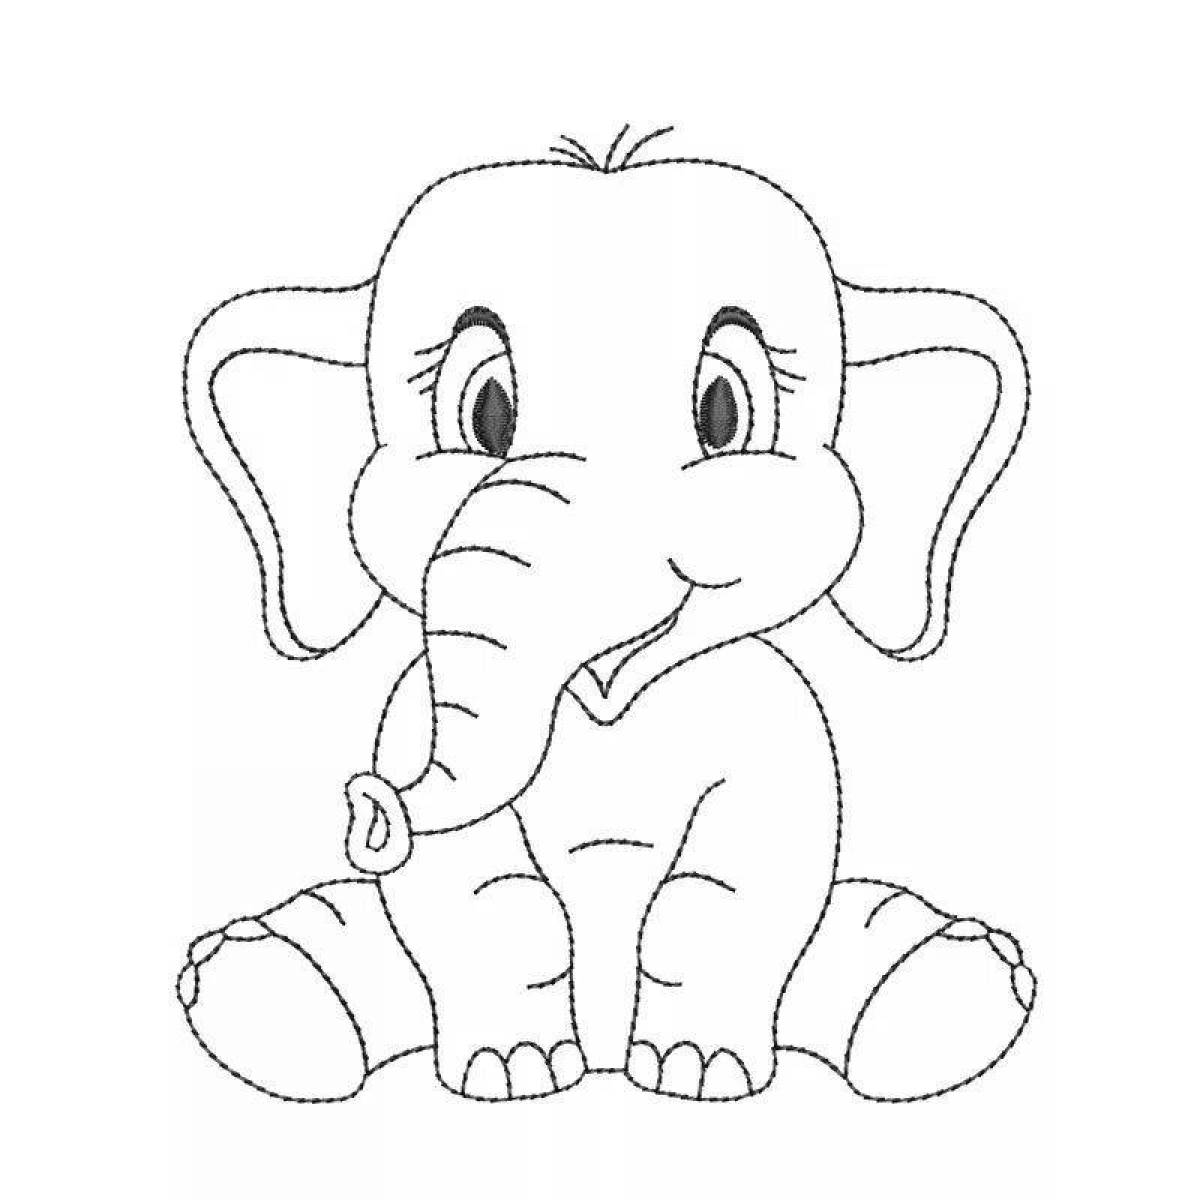 Fun elephant coloring book for 3-4 year olds